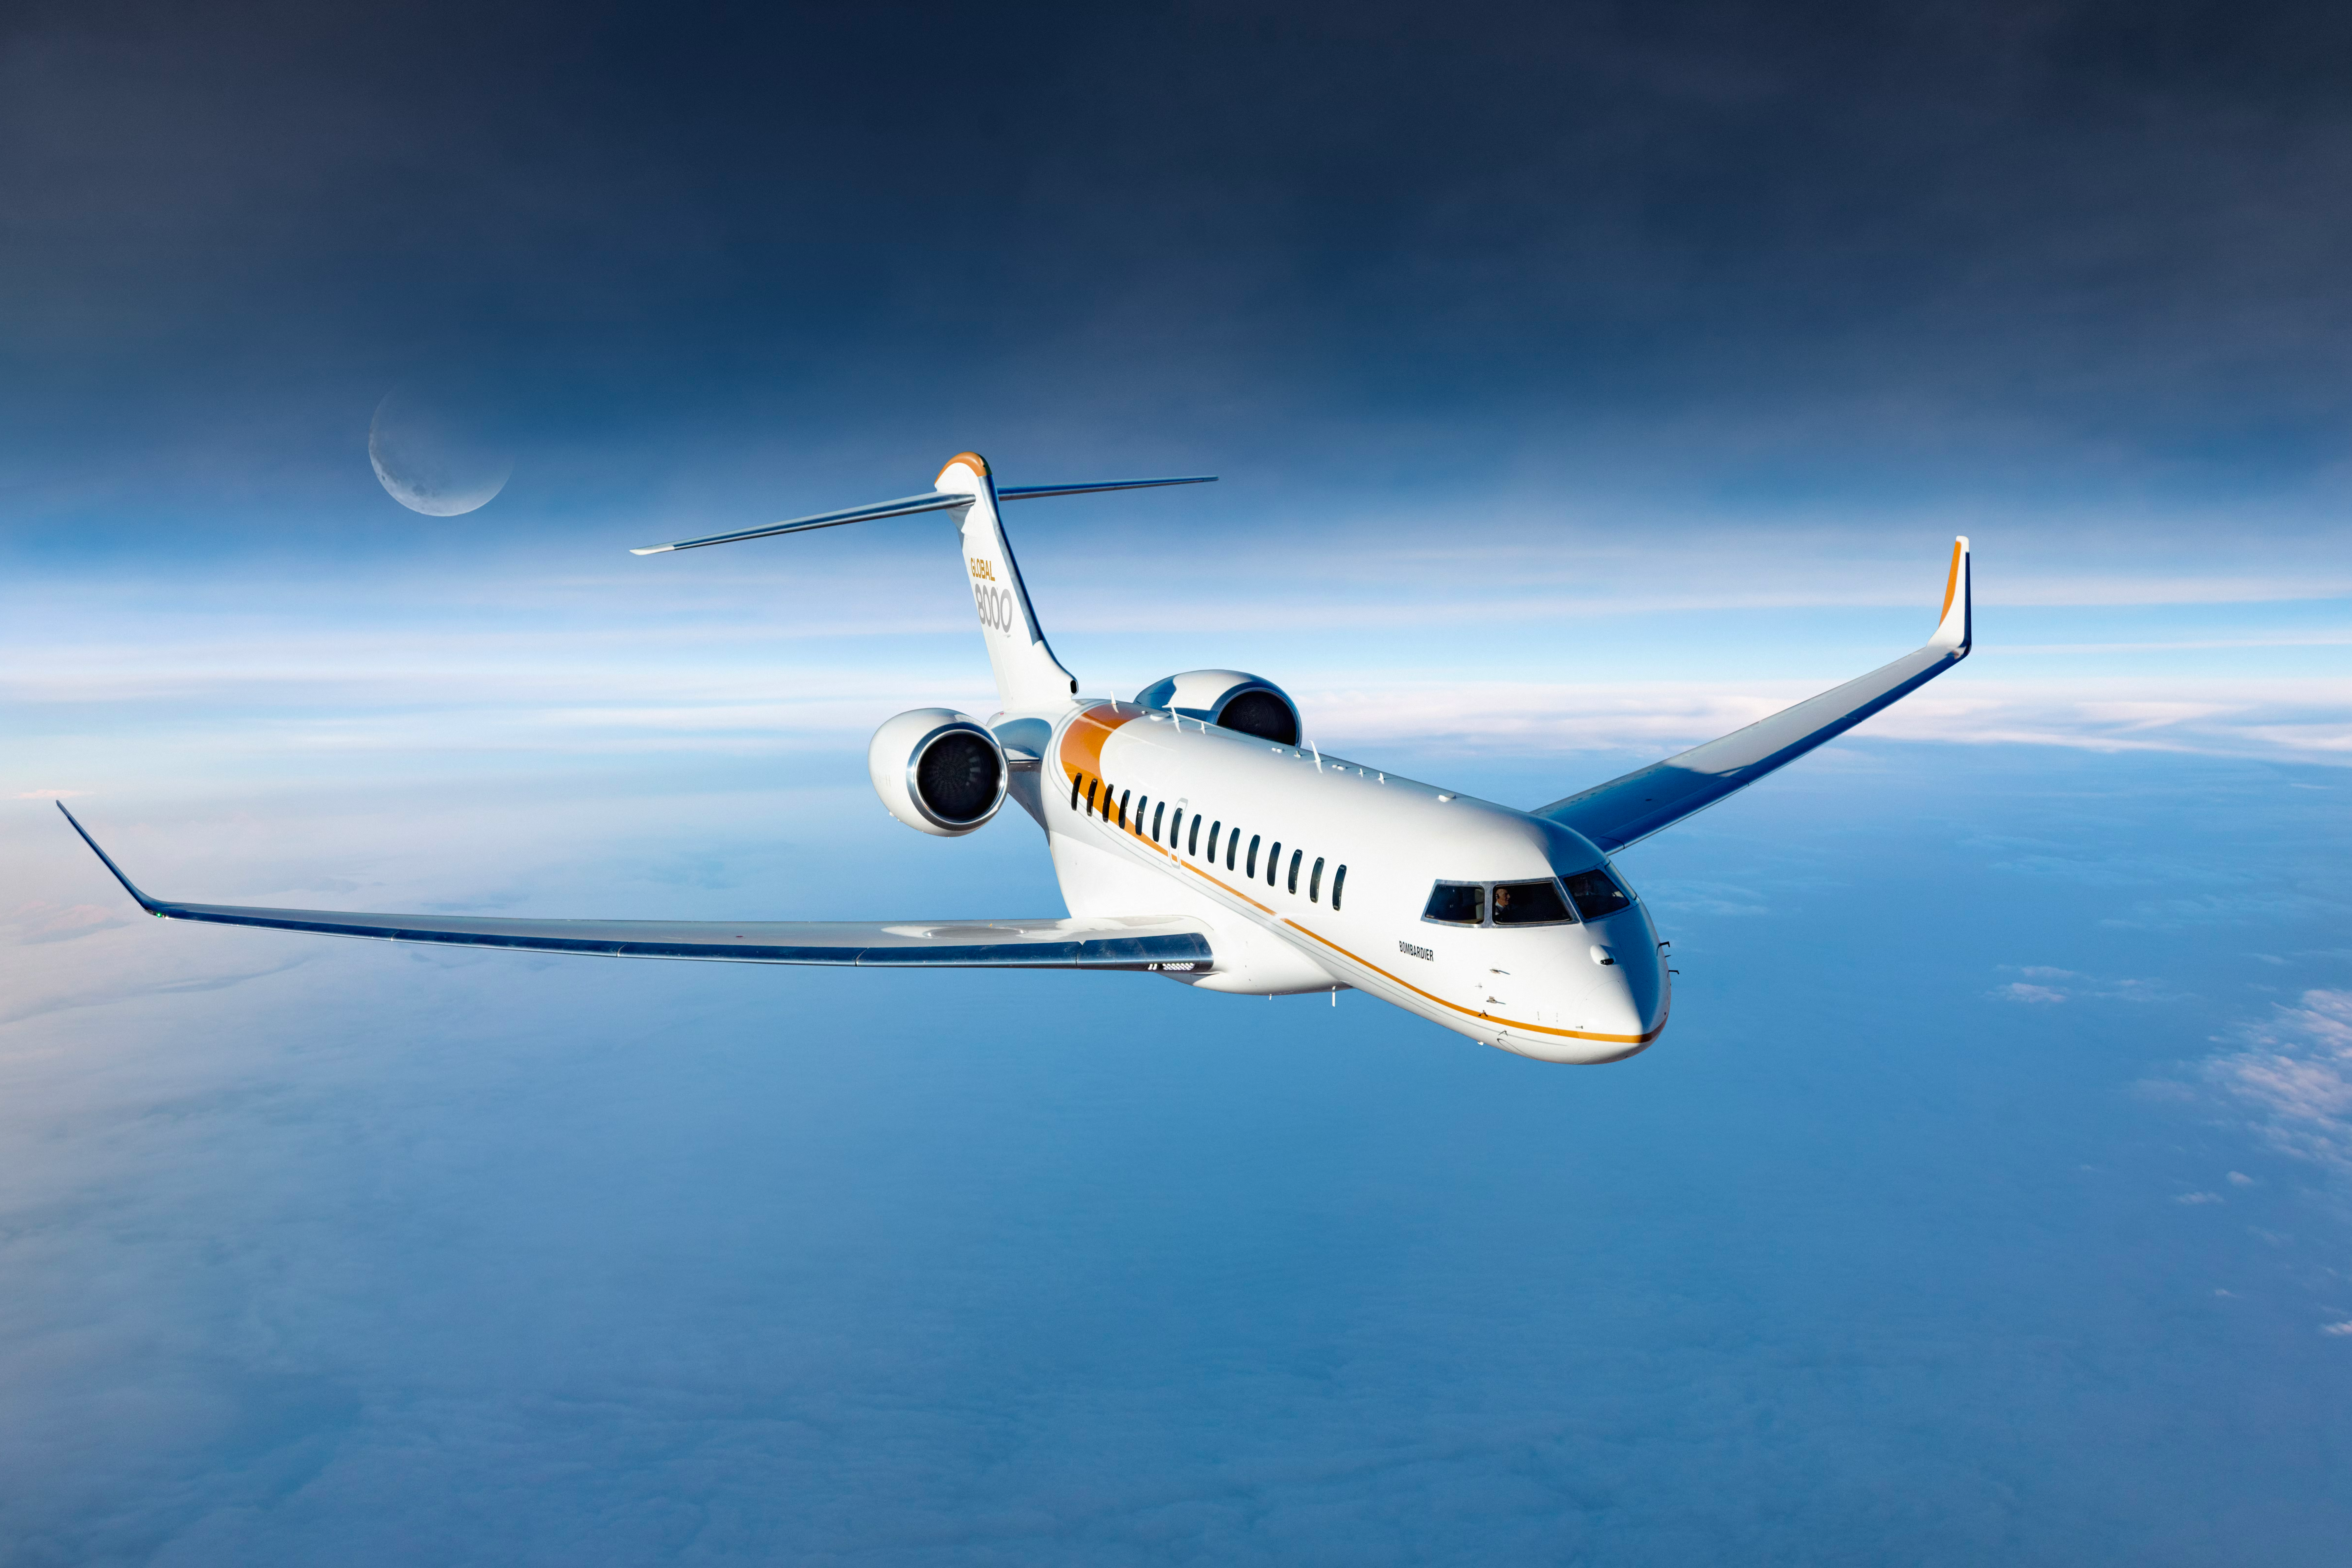 A Bombardier Global 8000 flying in the sky.